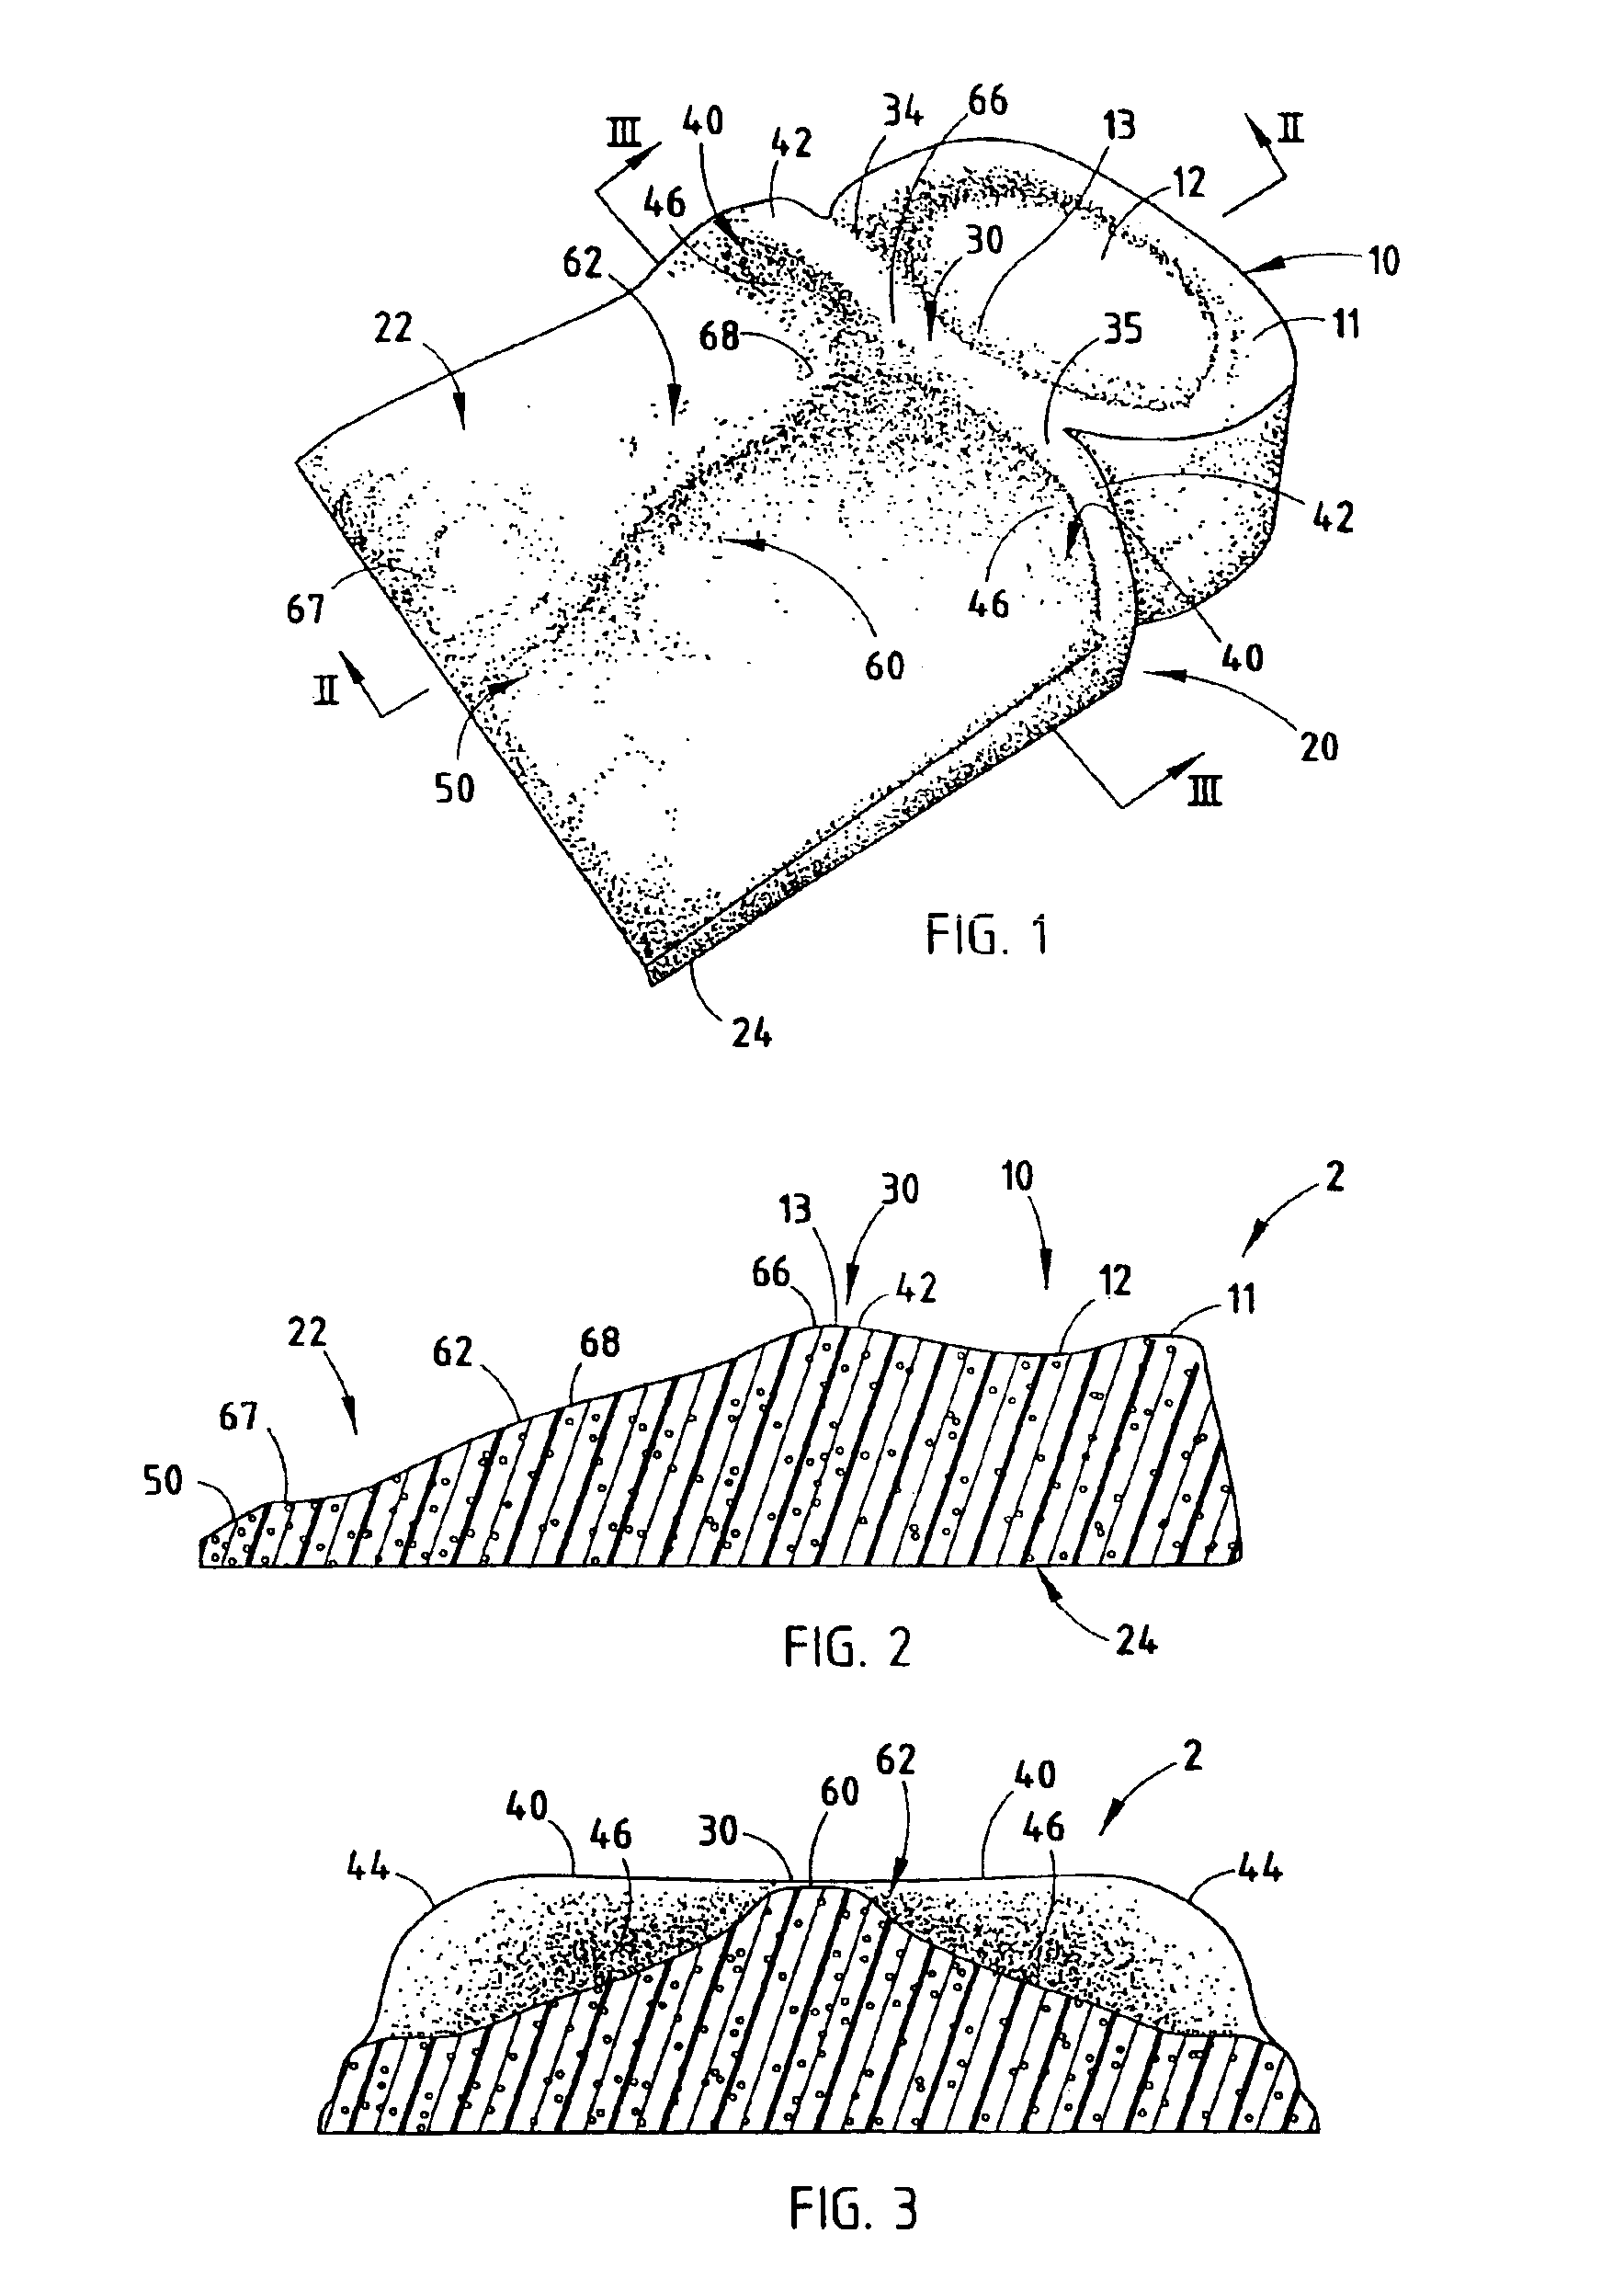 Upper body support device